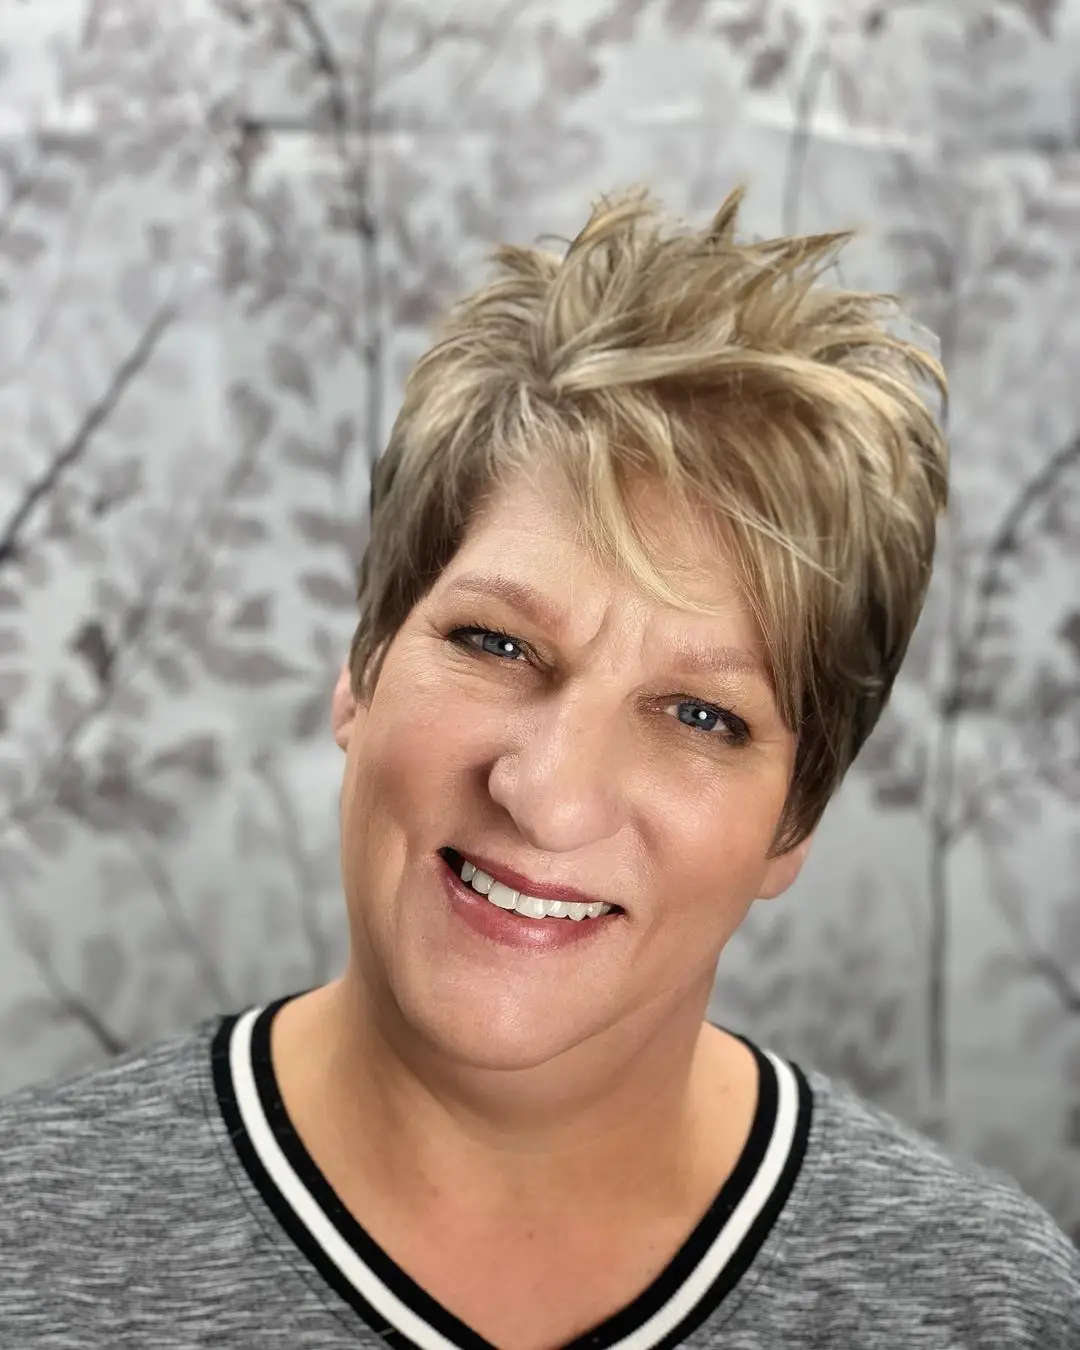 Short Haircuts for Women Over 50 That Take Years Off - Glaminati.com